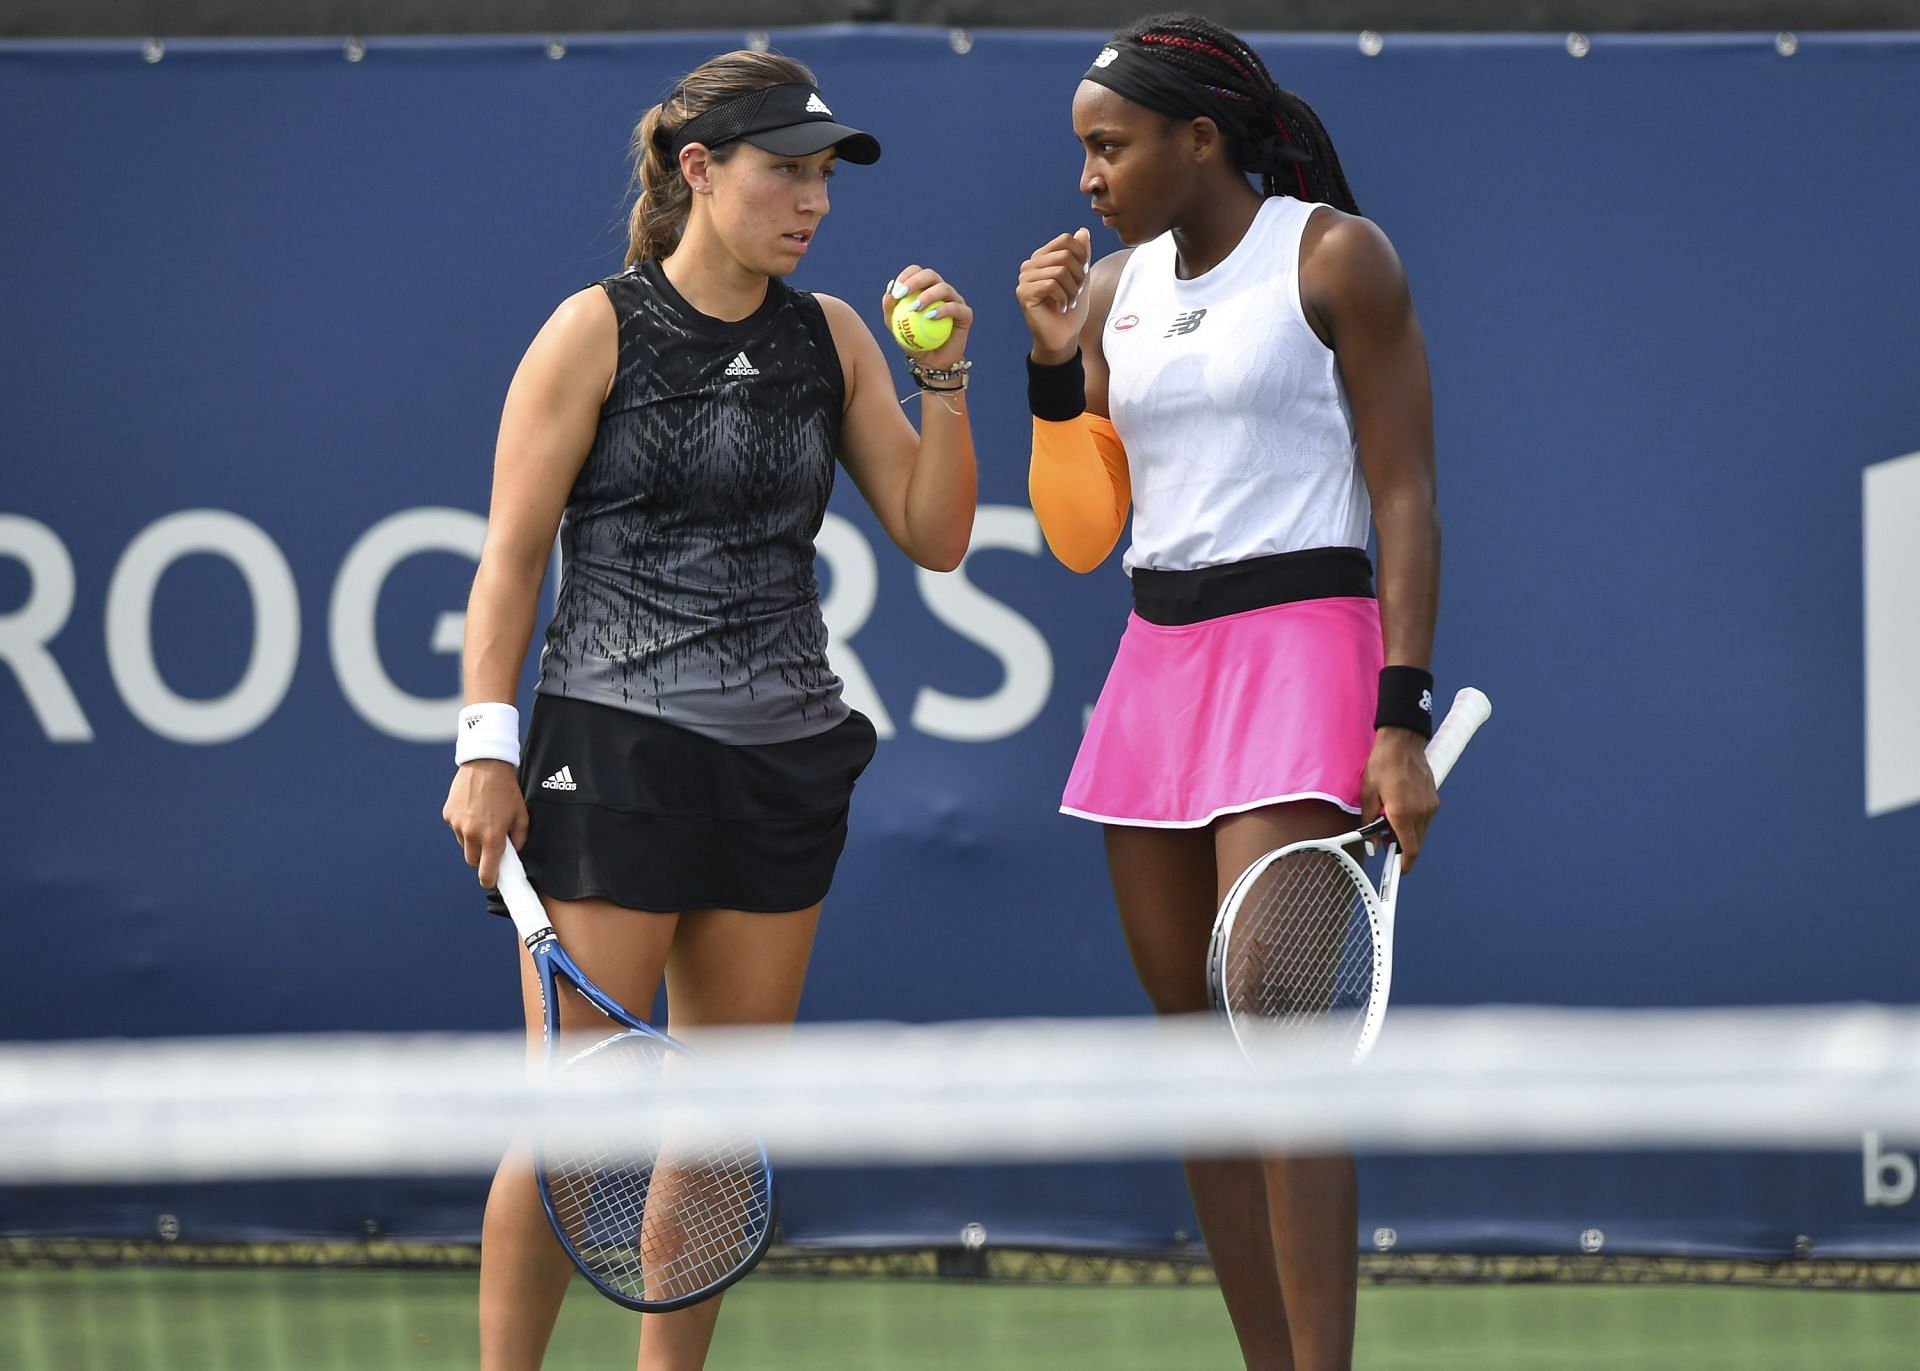 Jessica Pegula and Coco Gauff at the National Bank Open 2021